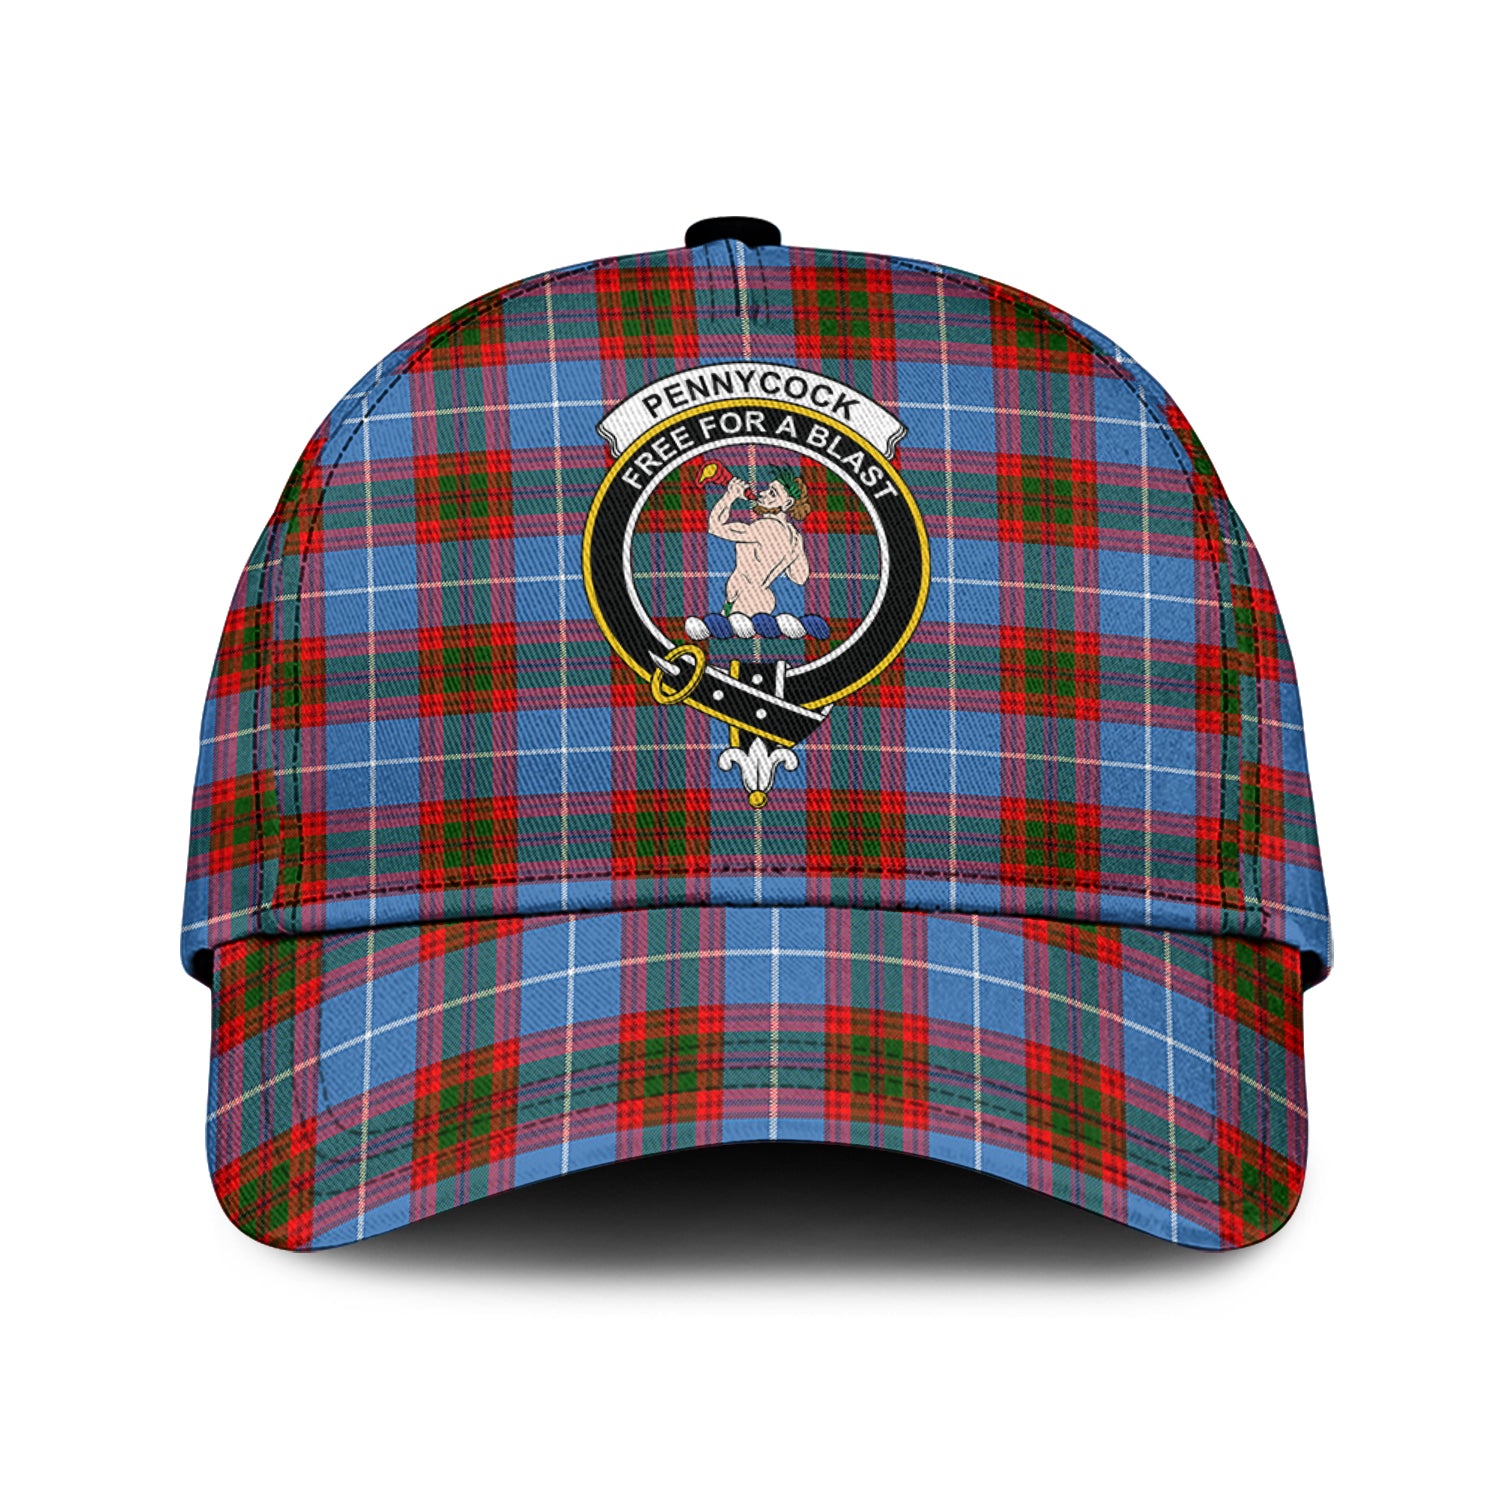 pennycook-tartan-classic-cap-with-family-crest